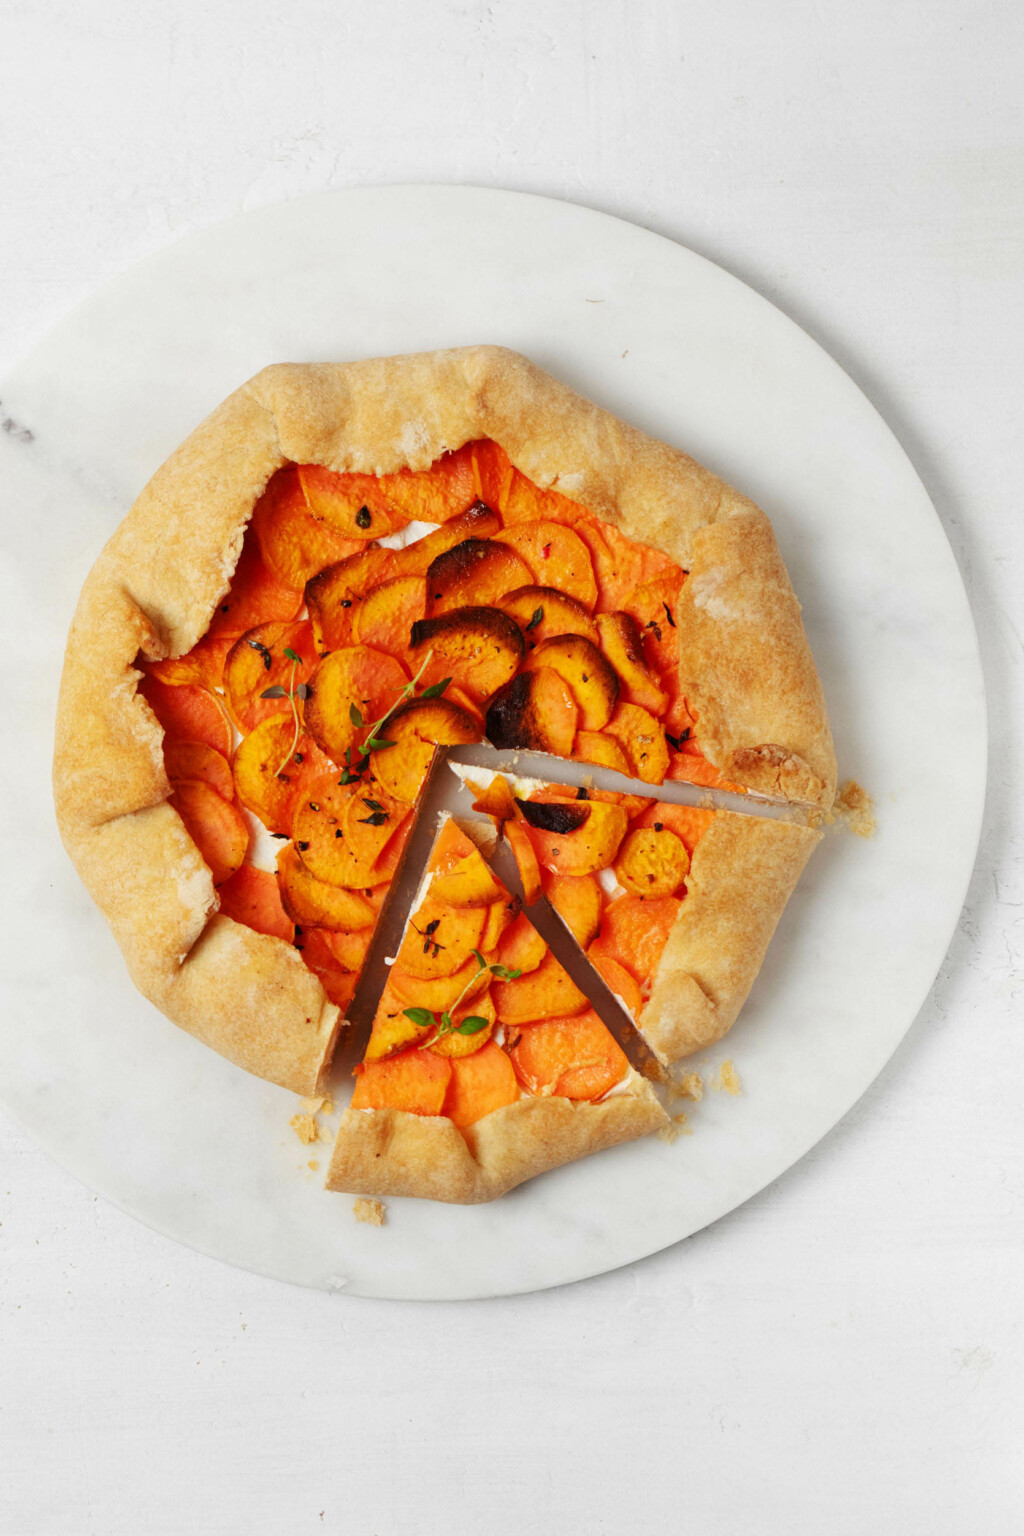 An overhead image of a festive, savory galette made with sweet potatoes.